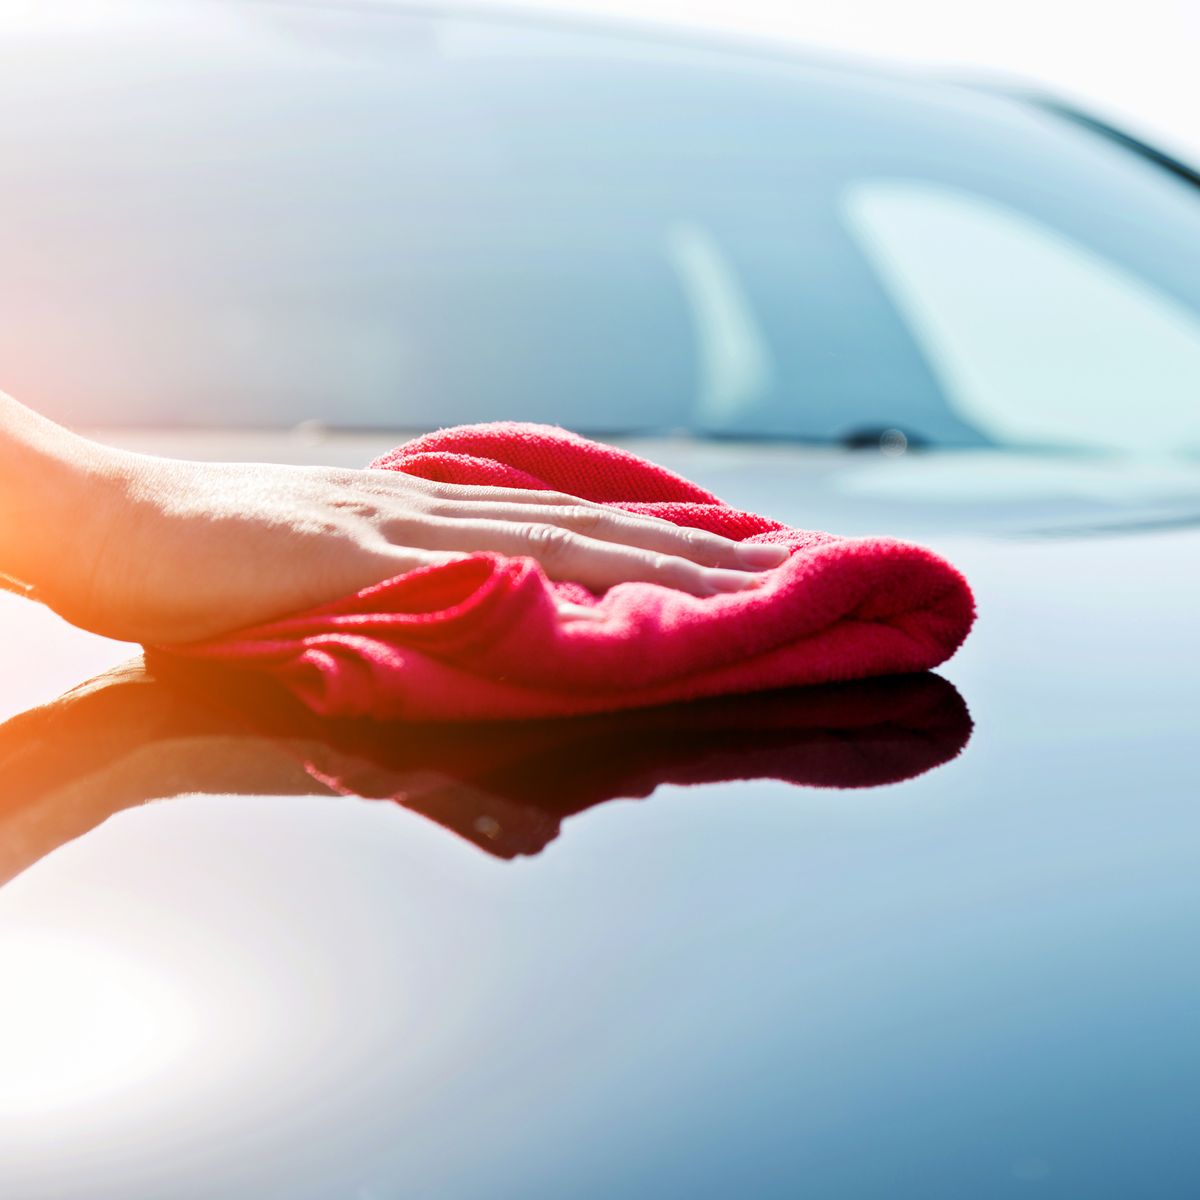 Car polish vs car wax: what's the difference?